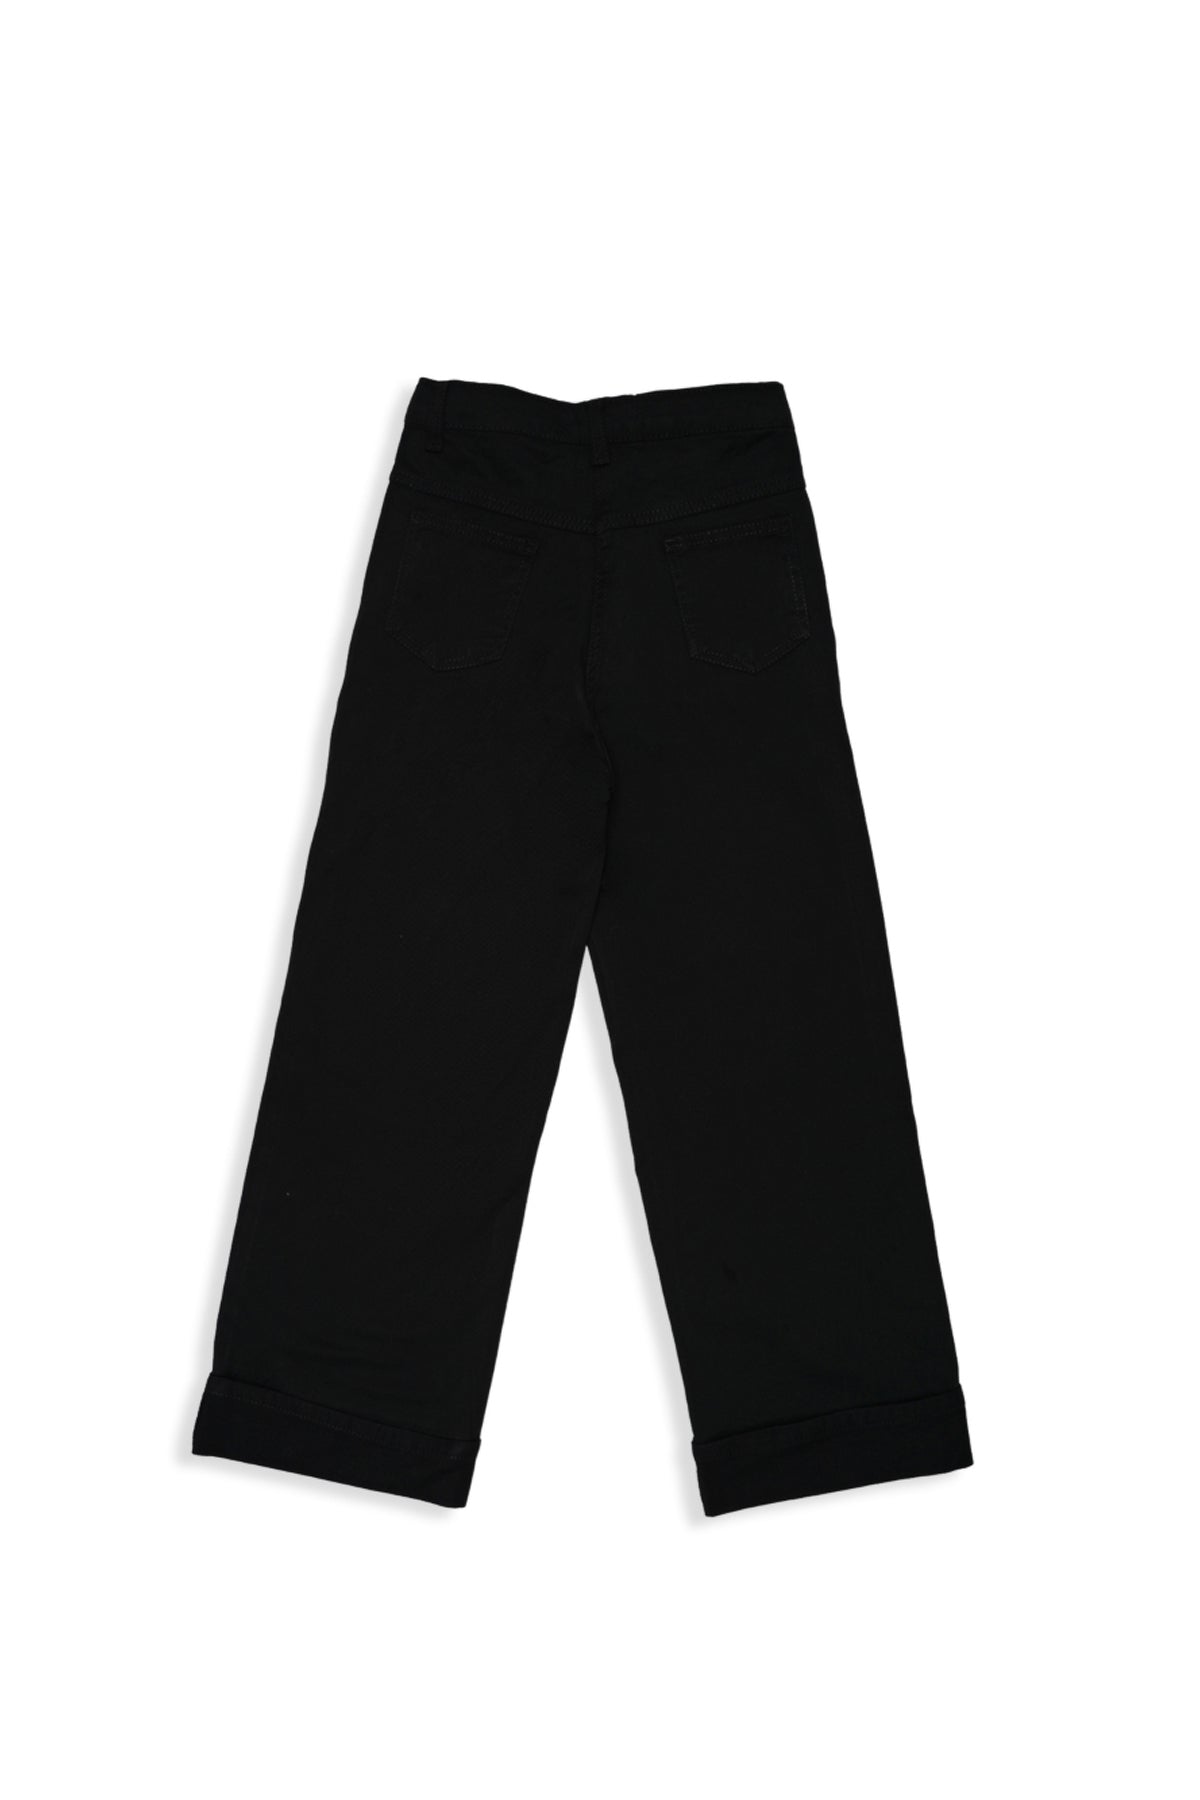 Embroidered Pants (GT-371)